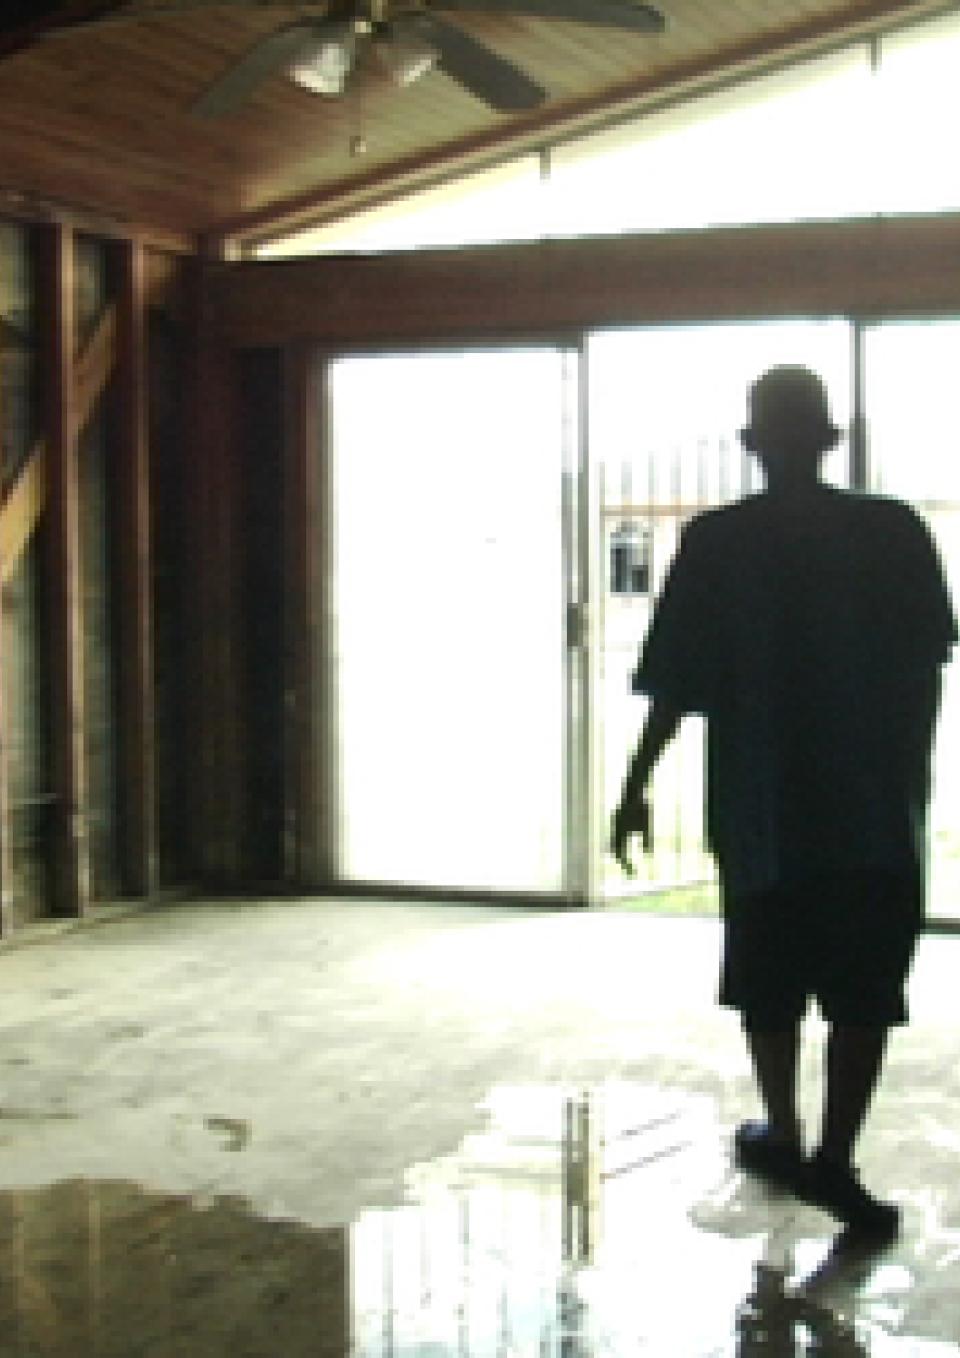 A man stands inside a building where the wall beams are fully exposed and water pools on the cement floor. He is silhouetted against bright windows in the background.